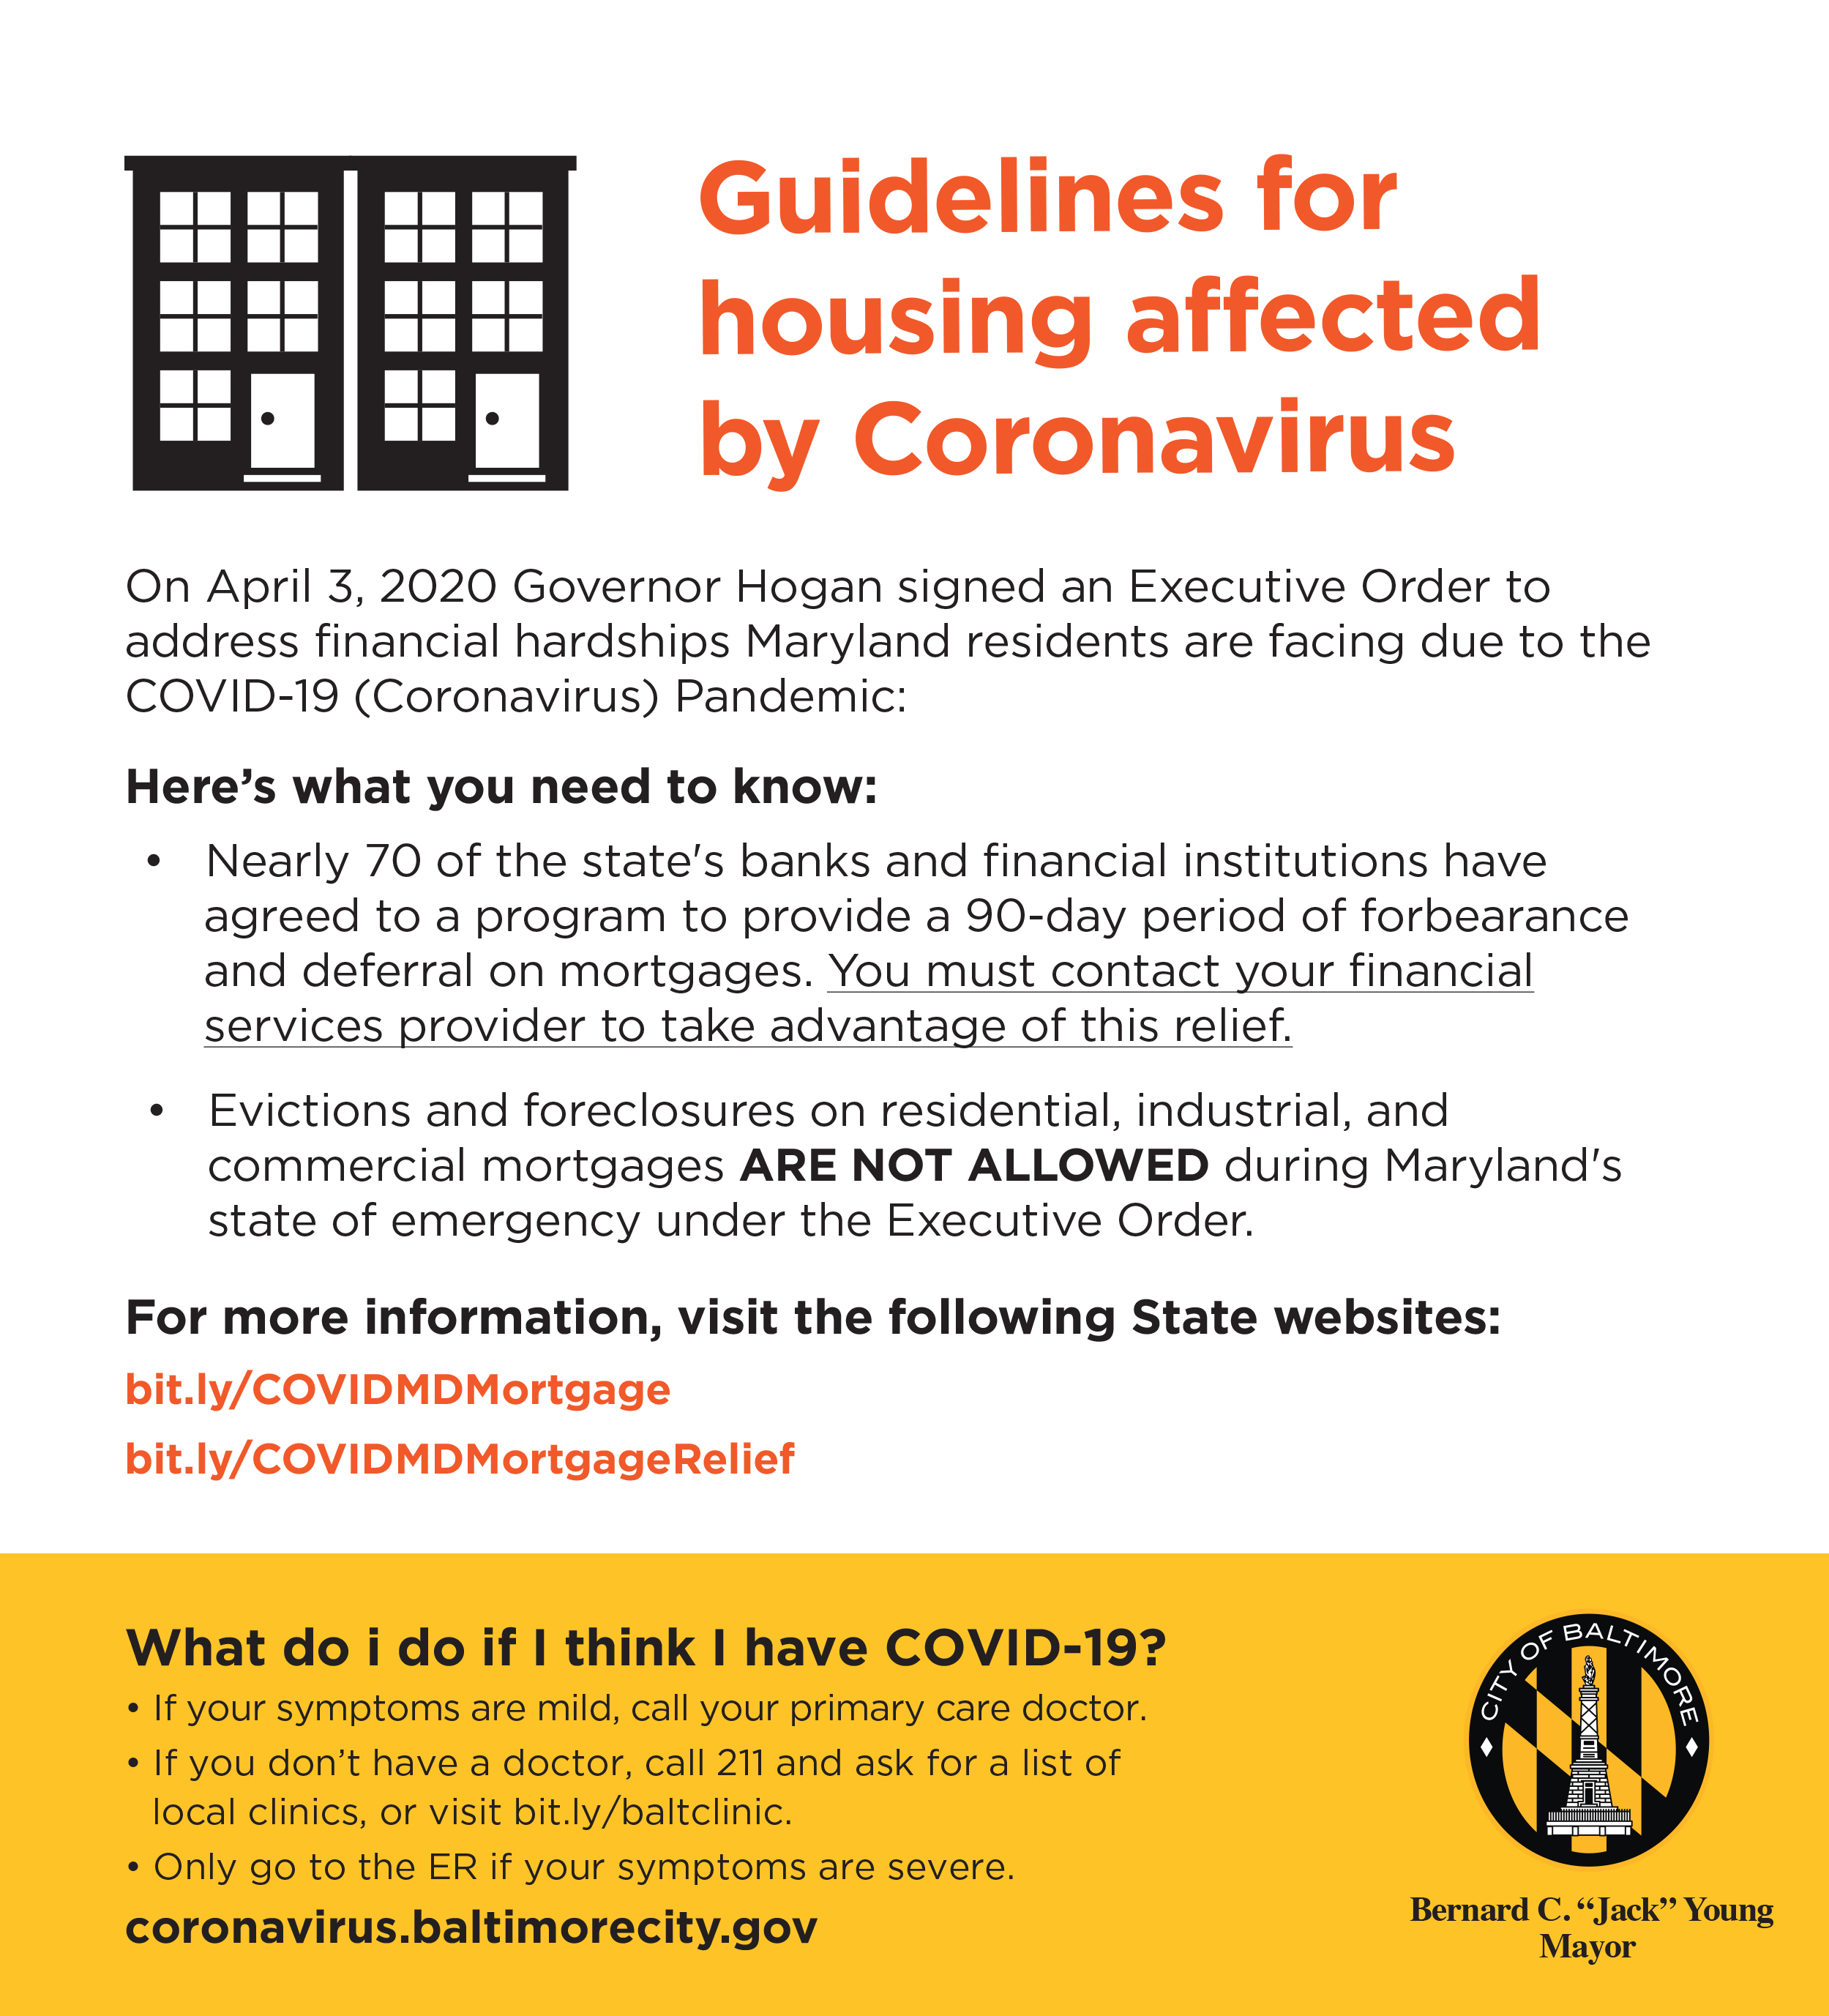 Visit bit.ly/COVIDMDMortgage for information related to housing guidelines affected by COVID